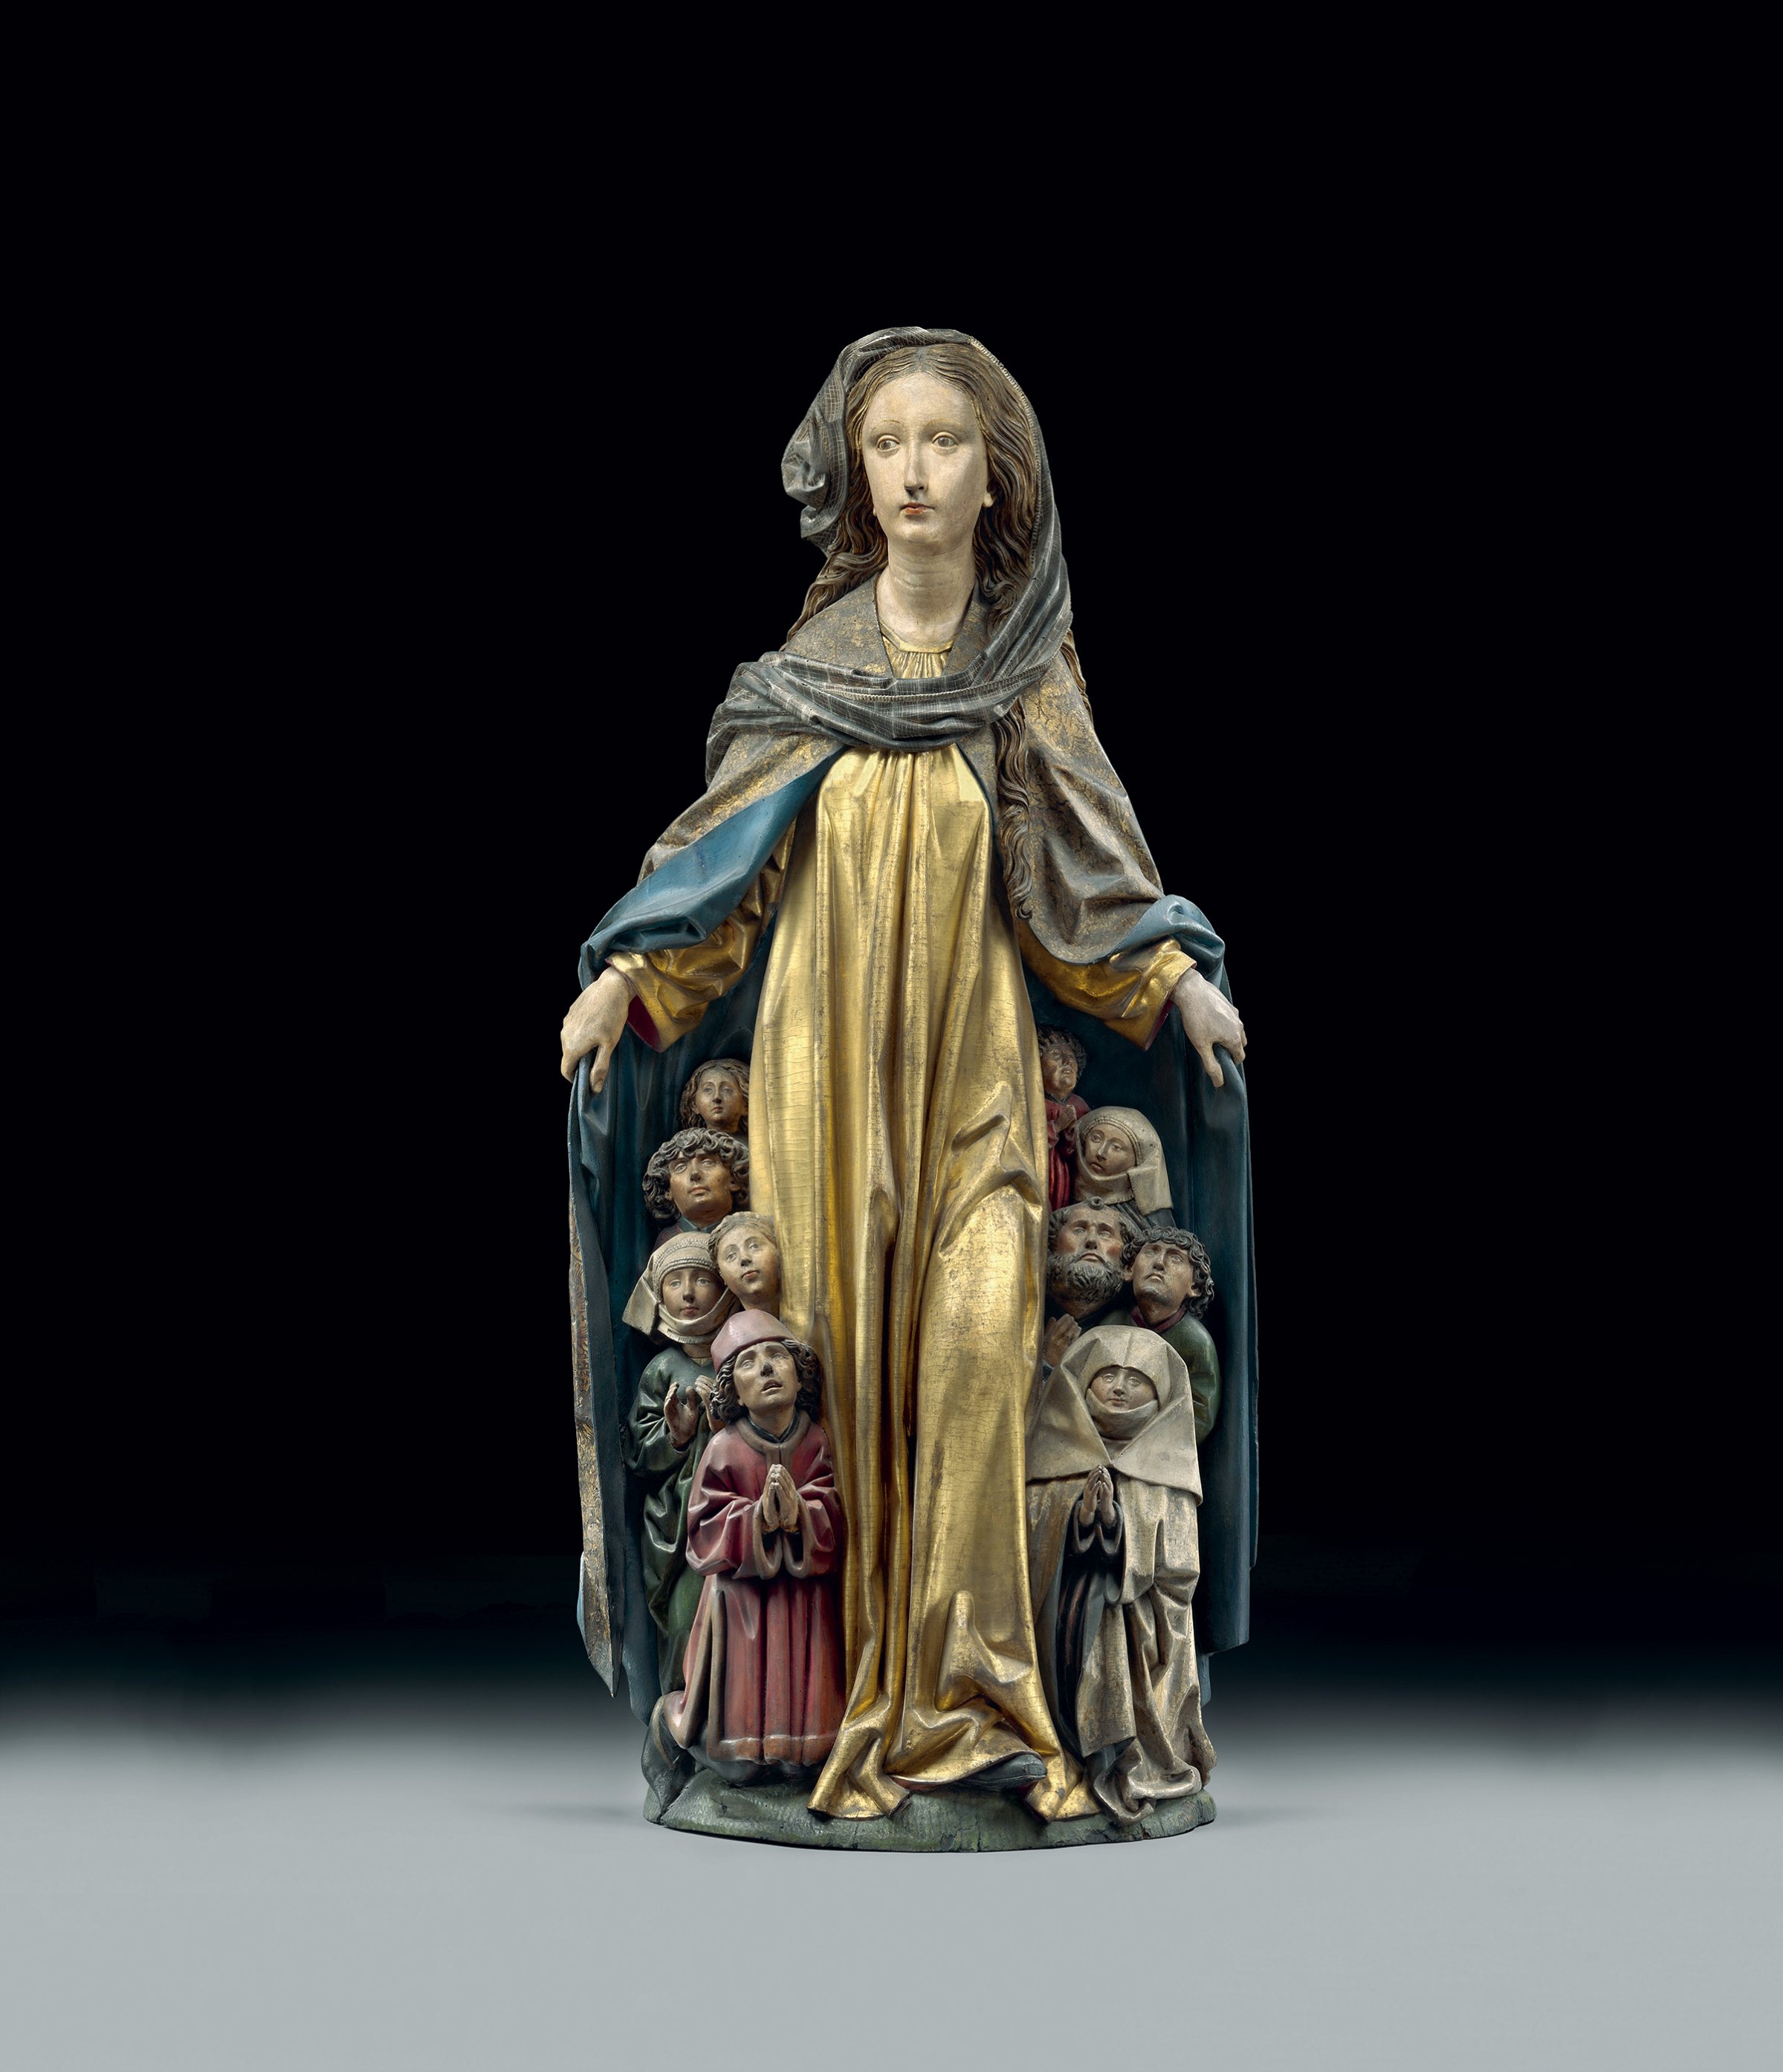 The Madonna with Protective Cloak, by Michel Erhart or Friedrich Schramm, c. 1480.